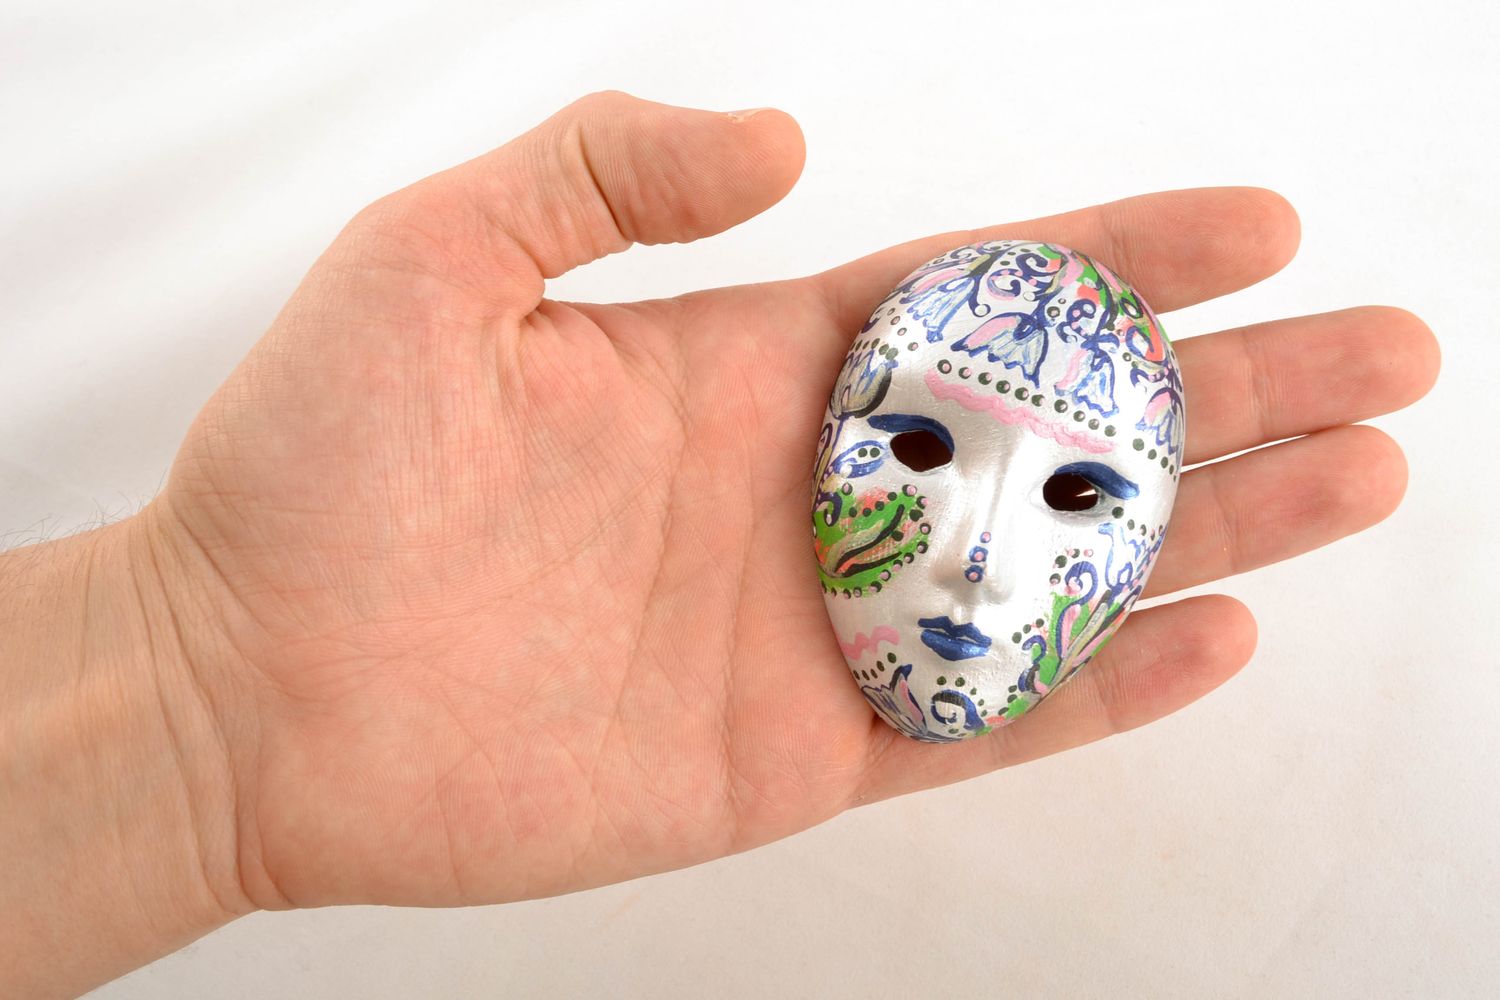 Clay souvenir mask with multi-colored patterns photo 1